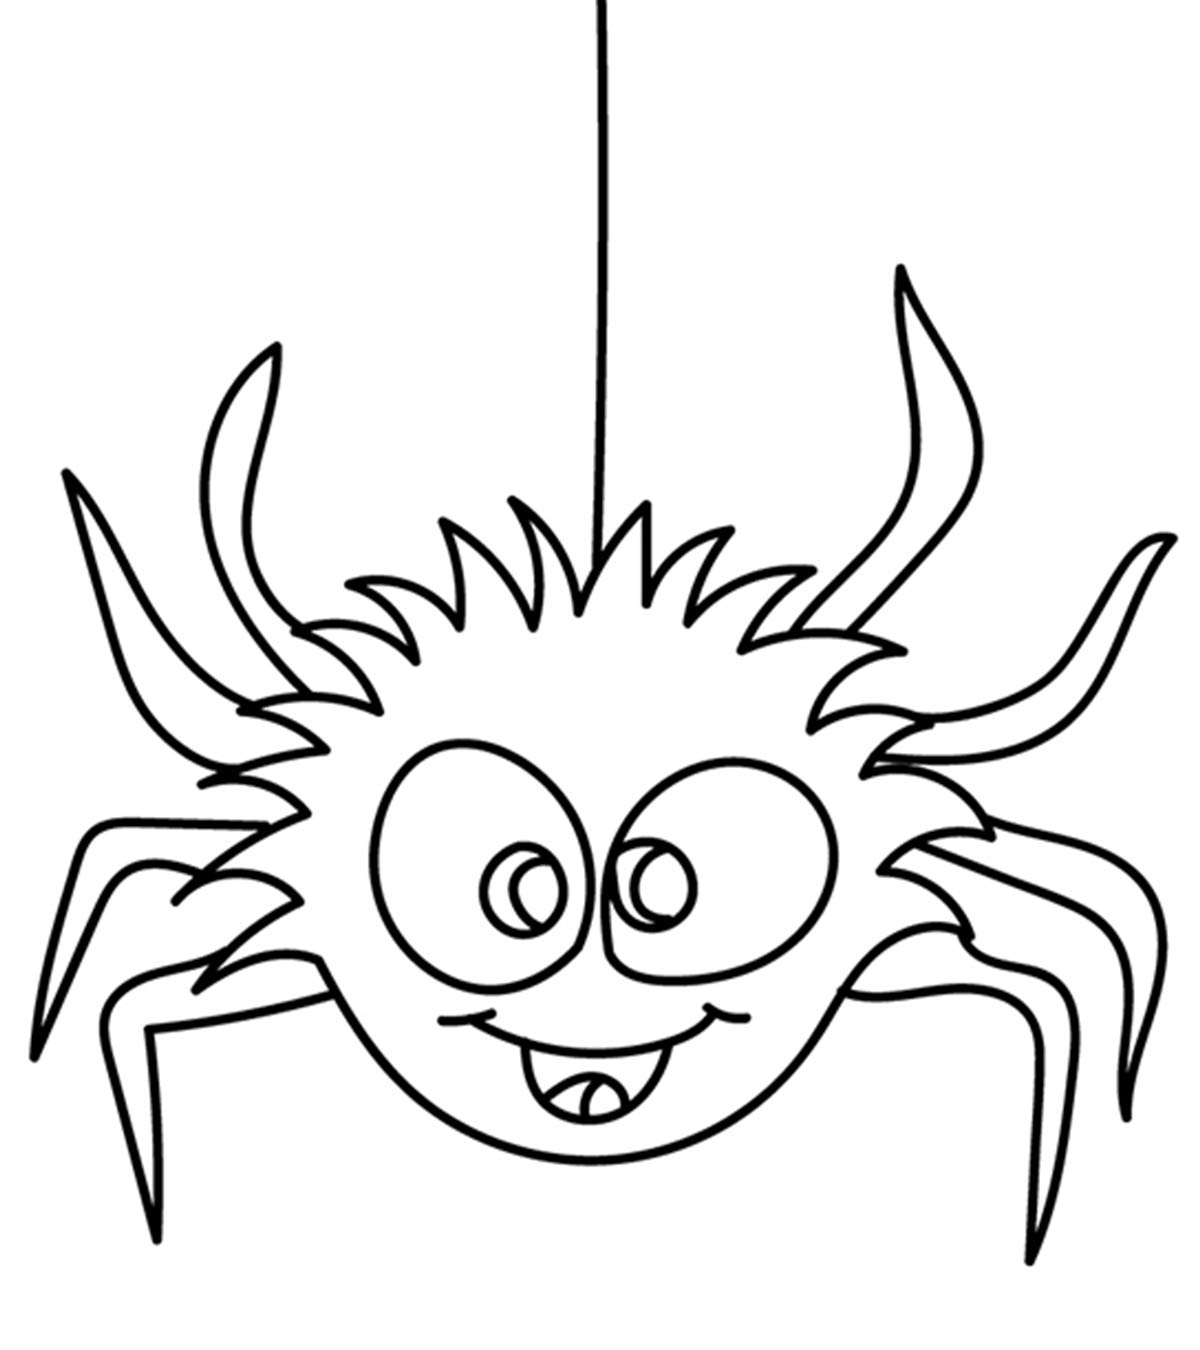 Top 10 Spider Coloring Pages Your Toddler Will Love To Color